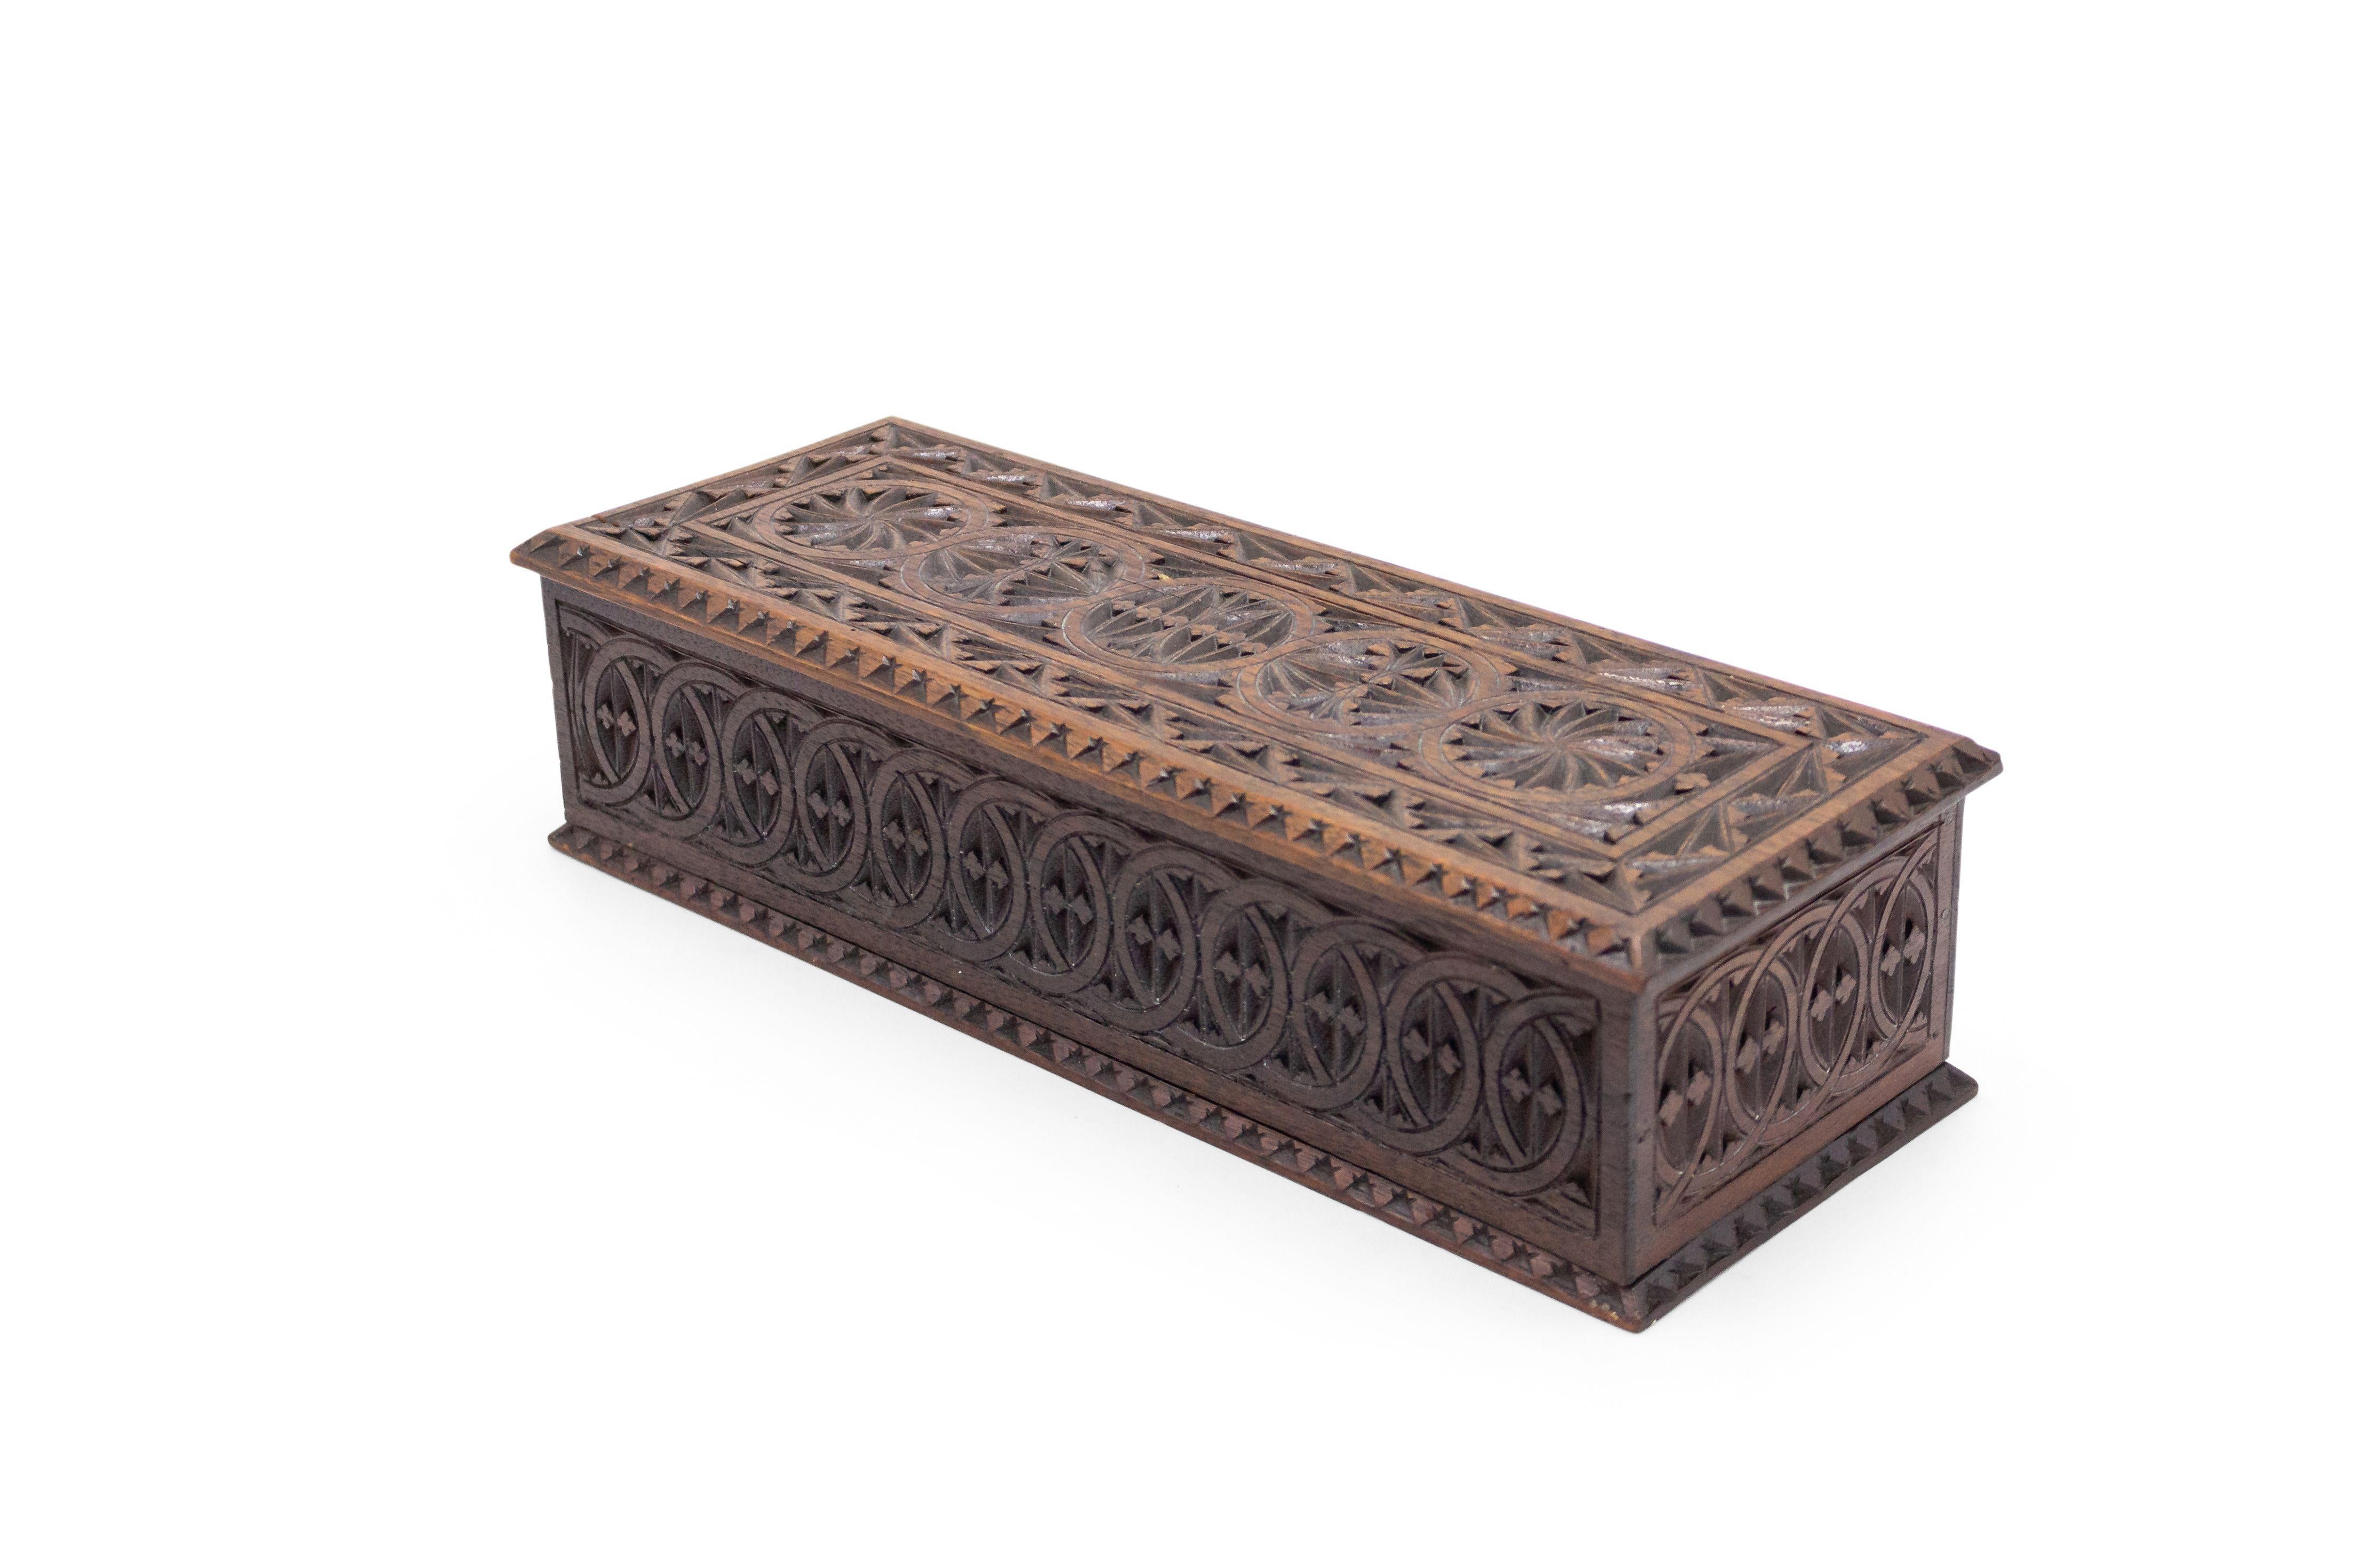 Rustic Continental mahogany rectangular box with a carved border and trim with 5 circle design top.
    